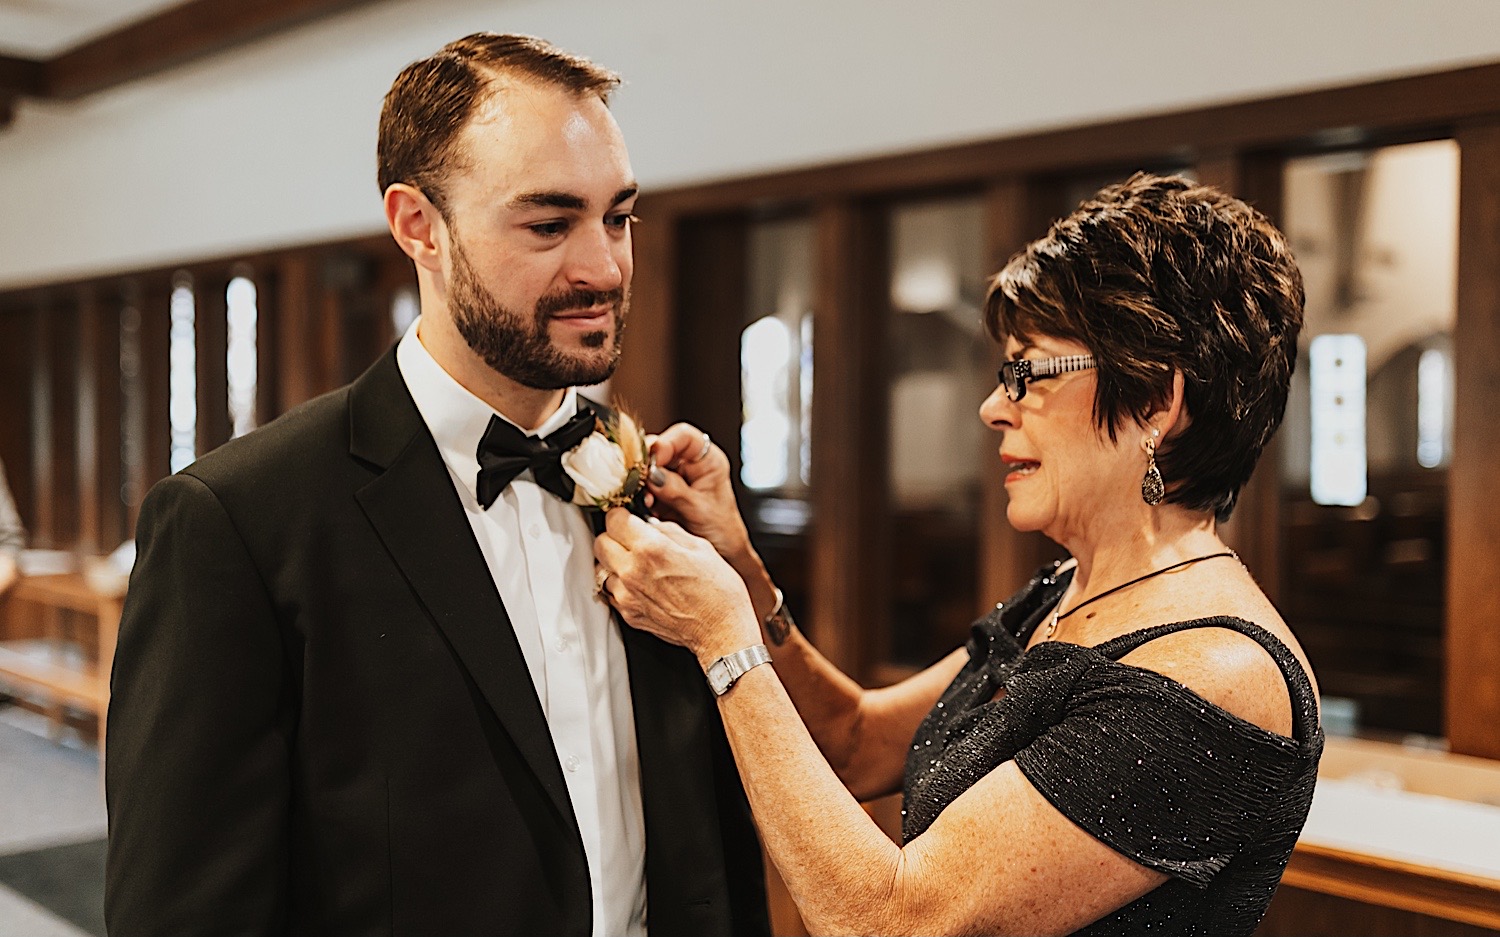 A mother helps put a boutonniere on her son before his wedding day